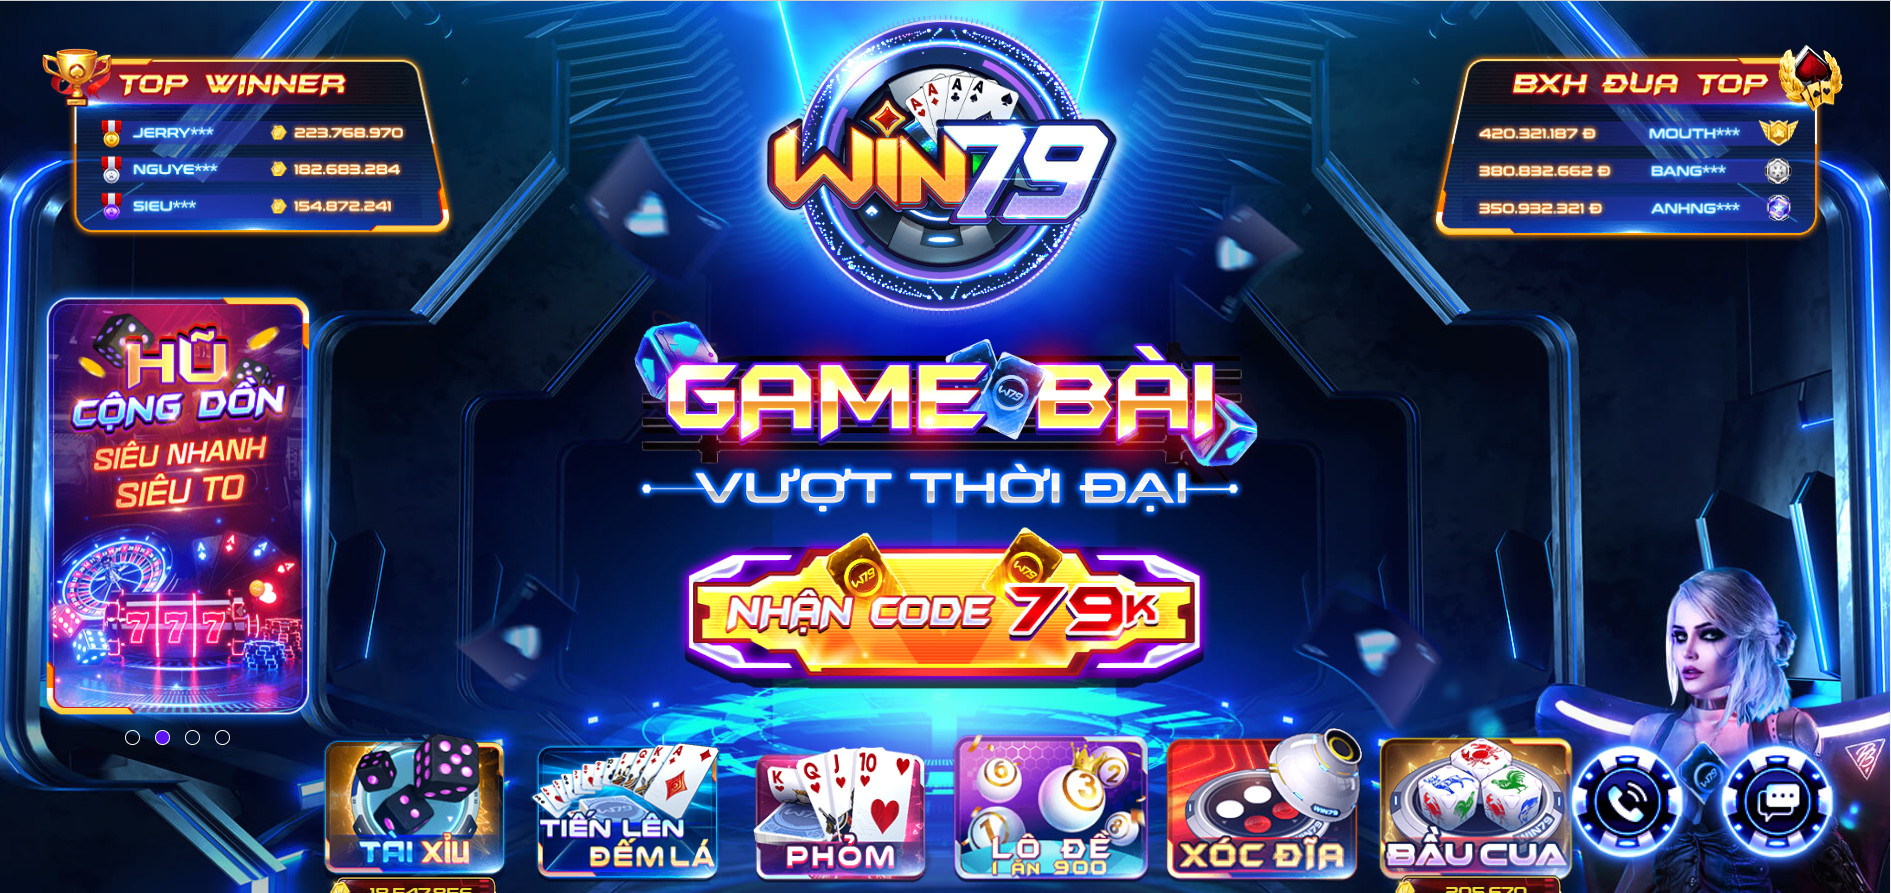 Cổng game Win79vip